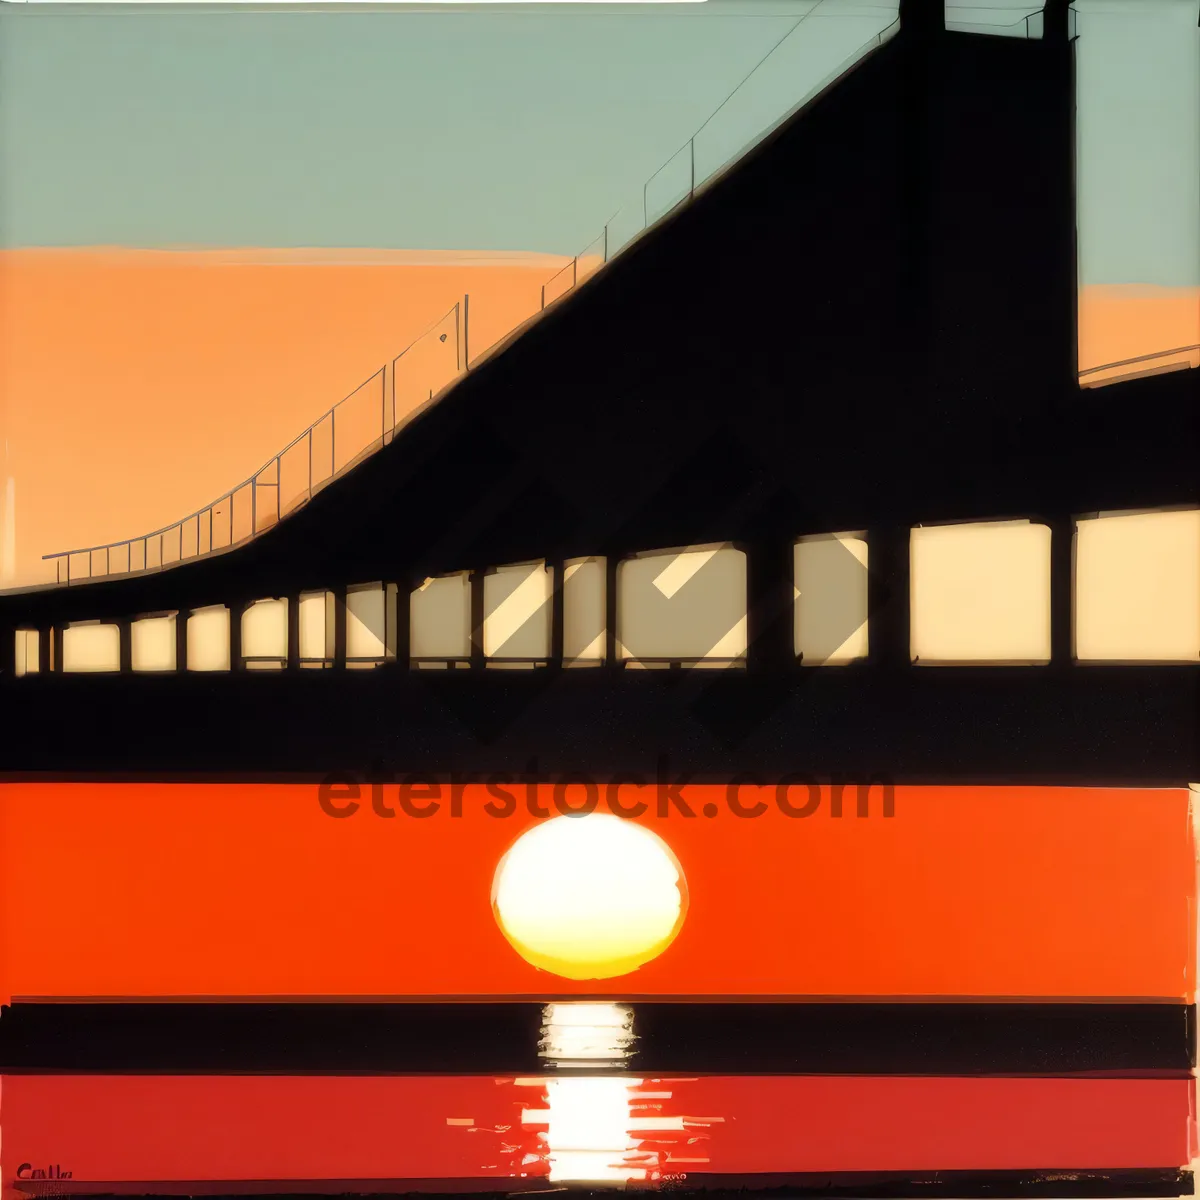 Picture of Suspension Bridge at Sunset Reflecting on Bay